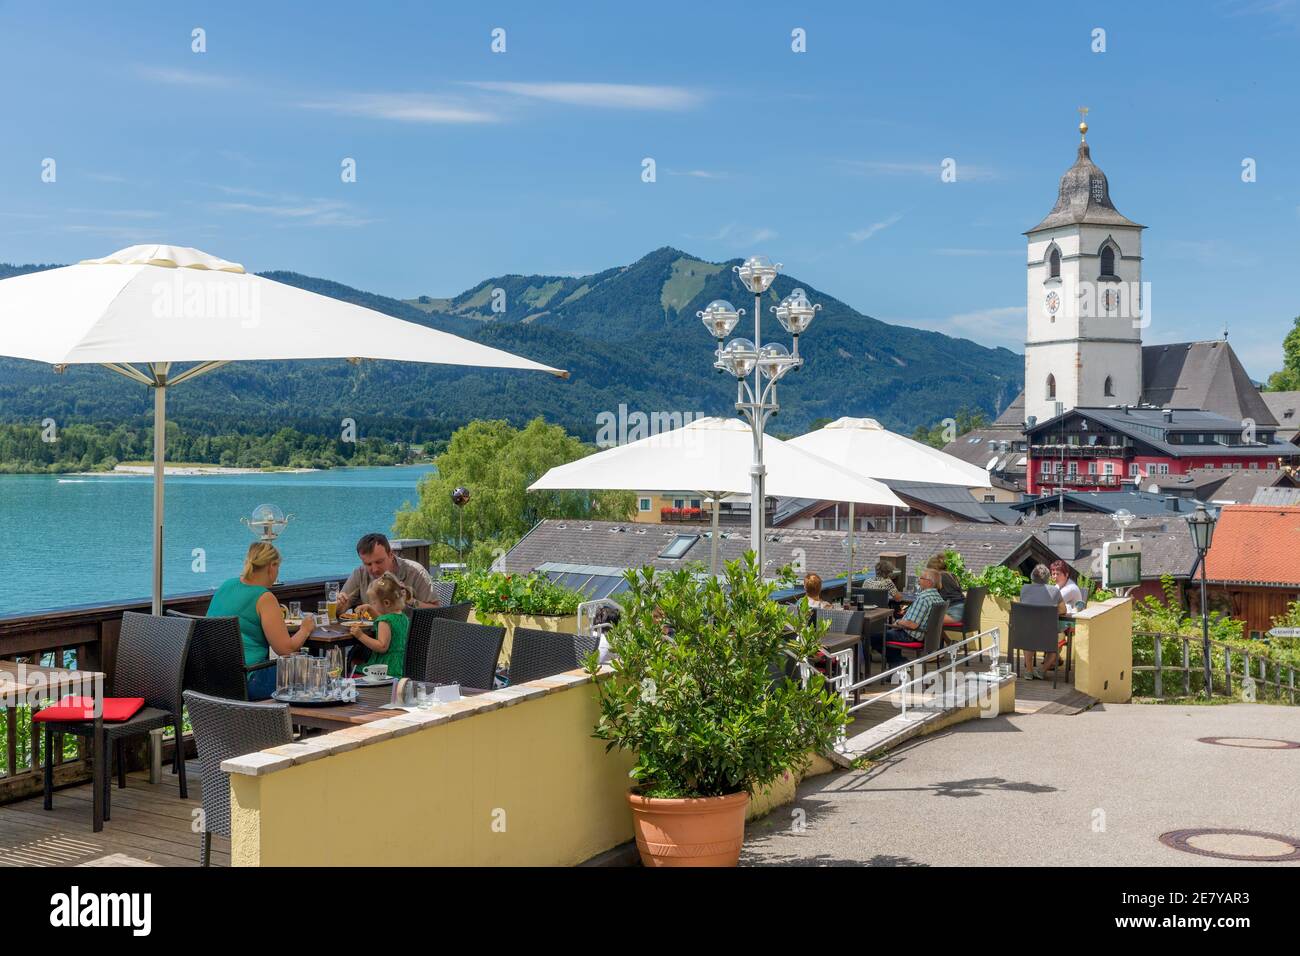 Family eating at terrace restaurant Sankt Wolfgang am Wolfgangsee, Austria Stock Photo